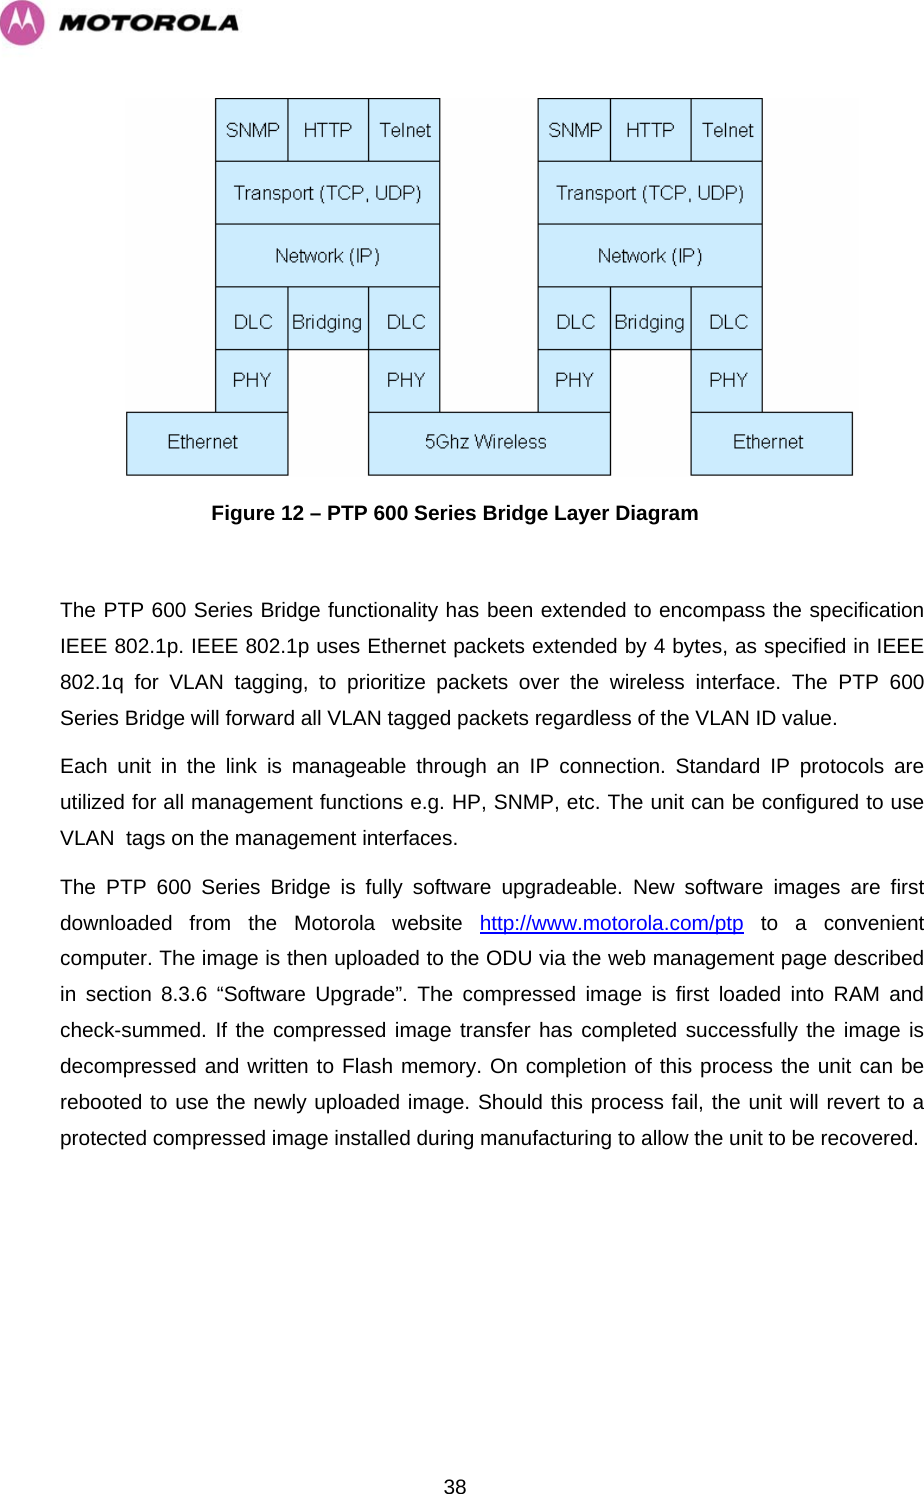   38 Figure 12 – PTP 600 Series Bridge Layer Diagram  The PTP 600 Series Bridge functionality has been extended to encompass the specification IEEE 802.1p. IEEE 802.1p uses Ethernet packets extended by 4 bytes, as specified in IEEE 802.1q for VLAN tagging, to prioritize packets over the wireless interface. The PTP 600 Series Bridge will forward all VLAN tagged packets regardless of the VLAN ID value. Each unit in the link is manageable through an IP connection. Standard IP protocols are utilized for all management functions e.g. HP, SNMP, etc. The unit can be configured to use VLAN  tags on the management interfaces. The PTP 600 Series Bridge is fully software upgradeable. New software images are first downloaded from the Motorola website http://www.motorola.com/ptp to a convenient computer. The image is then uploaded to the ODU via the web management page described in section 8.3.6 “Software Upgrade”. The compressed image is first loaded into RAM and check-summed. If the compressed image transfer has completed successfully the image is decompressed and written to Flash memory. On completion of this process the unit can be rebooted to use the newly uploaded image. Should this process fail, the unit will revert to a protected compressed image installed during manufacturing to allow the unit to be recovered.  